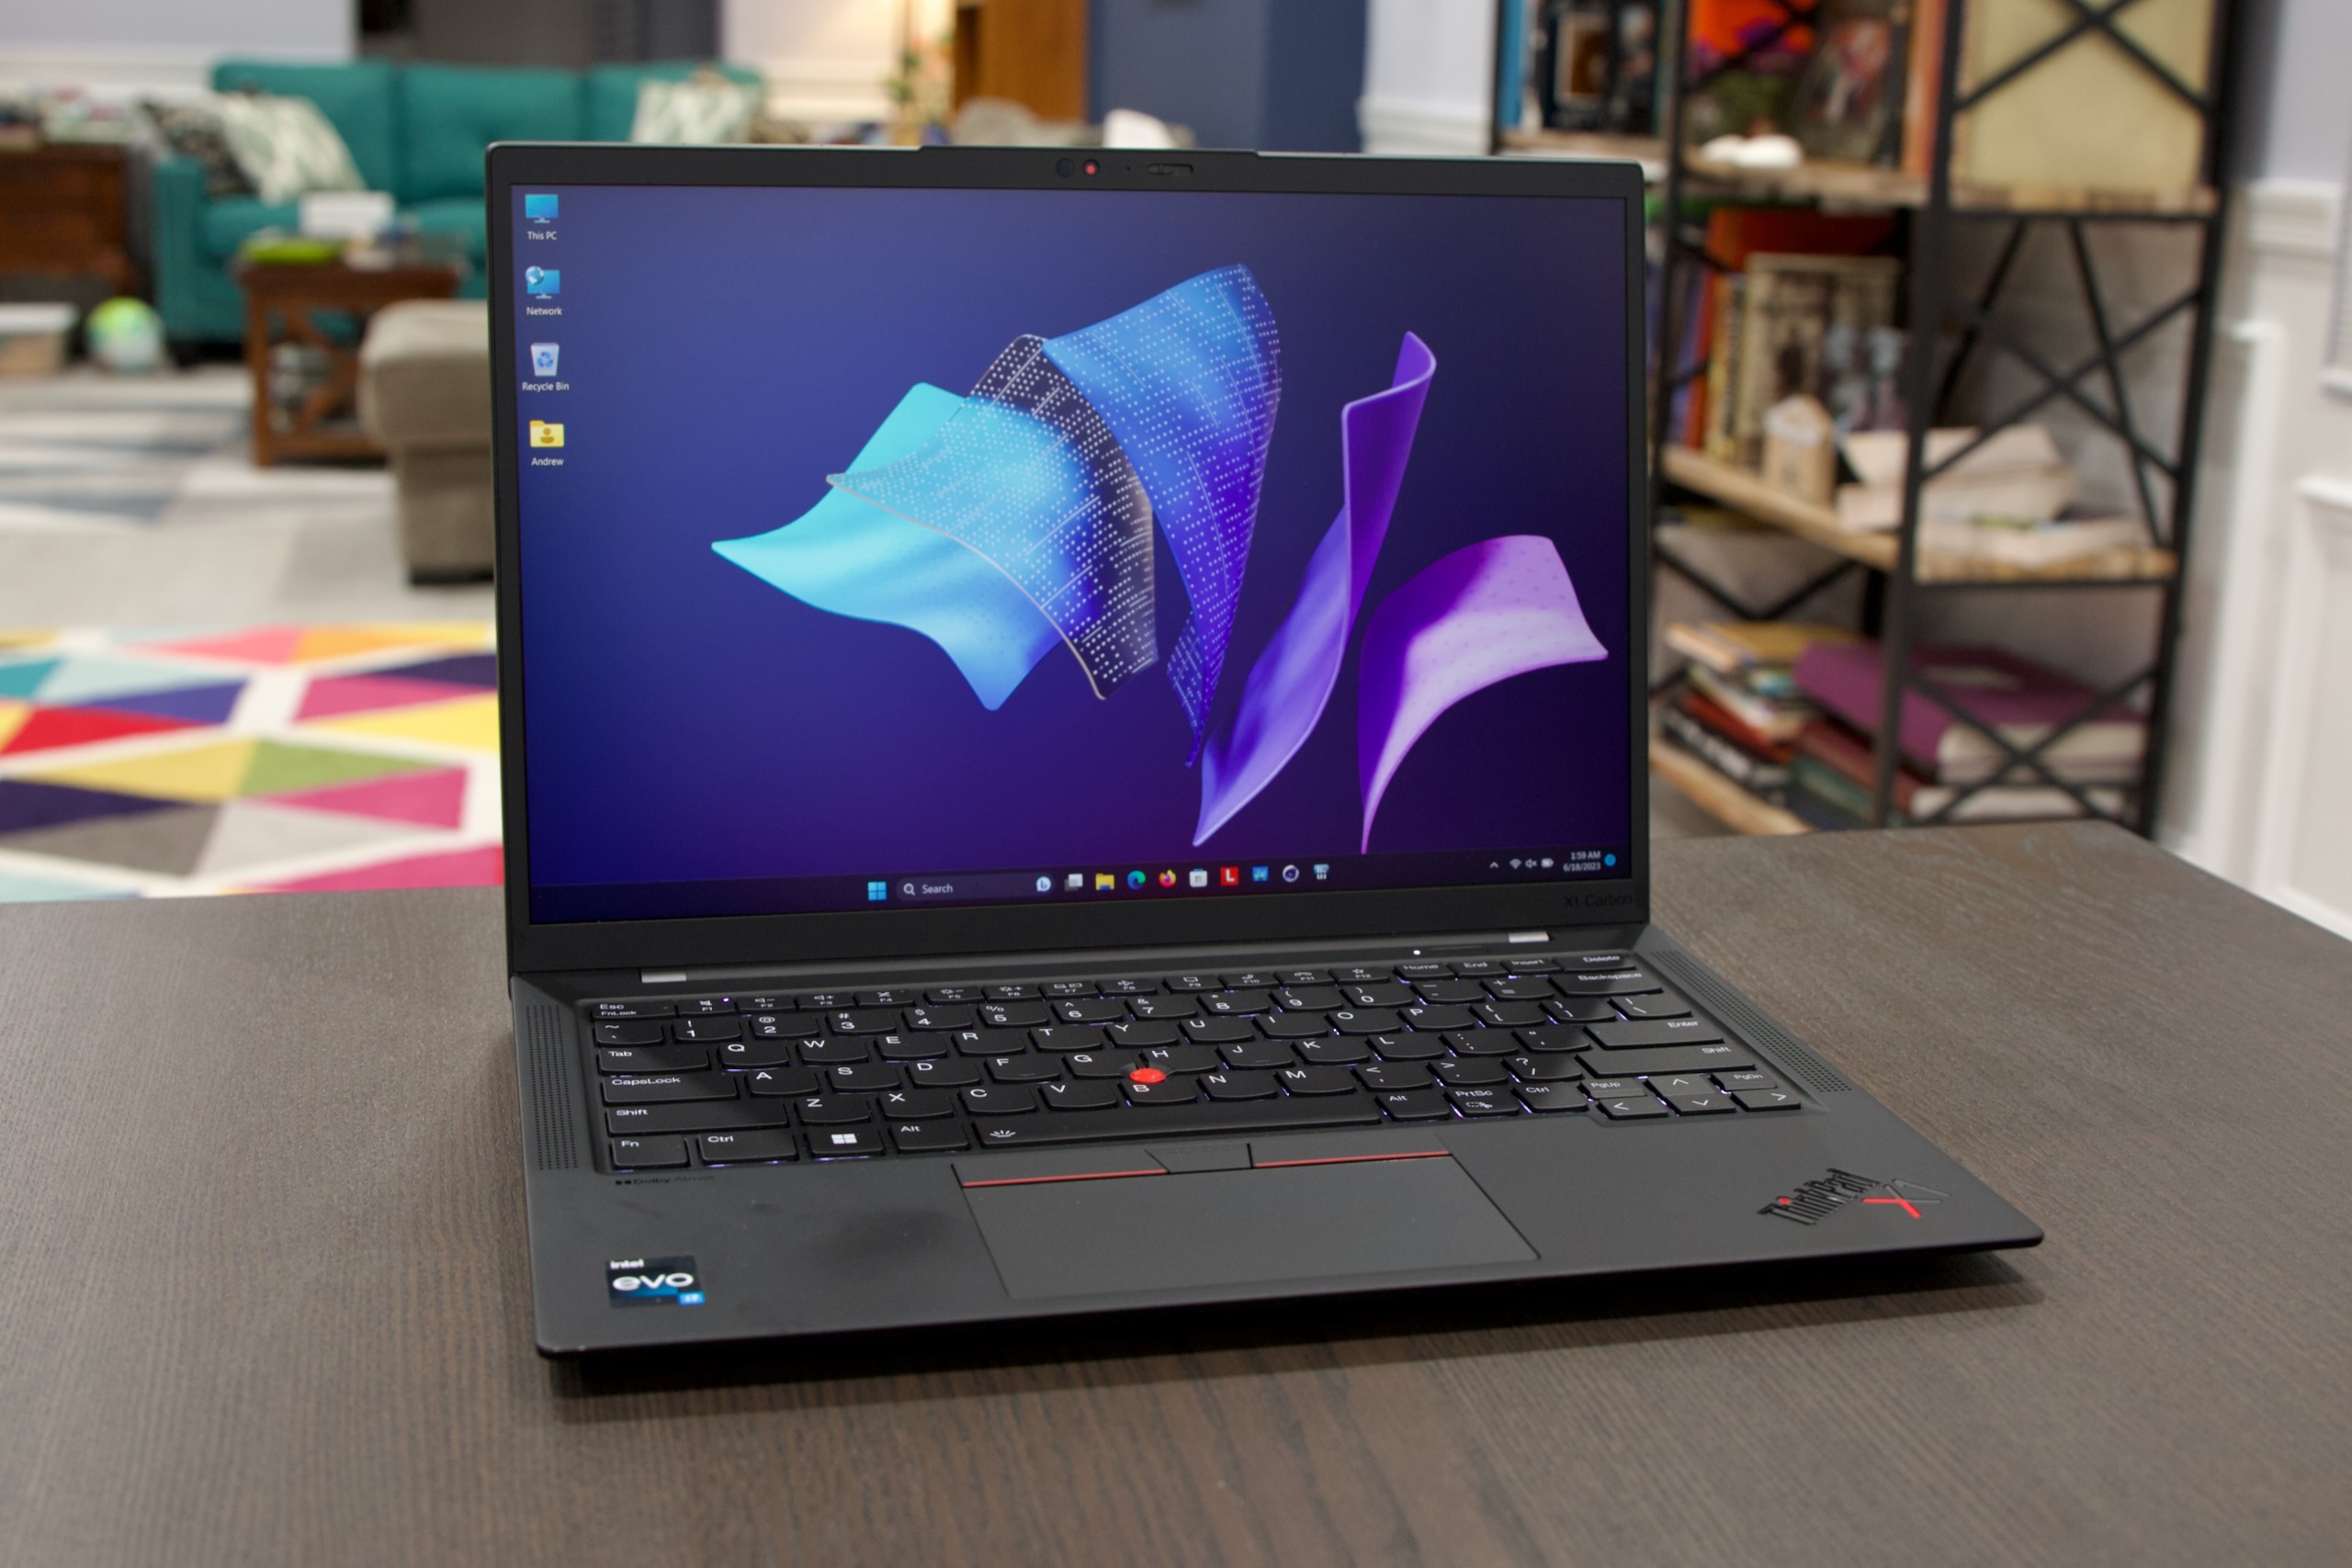 Lenovo ThinkPad X1 Carbon Gen 11 review: Two steps forward, one